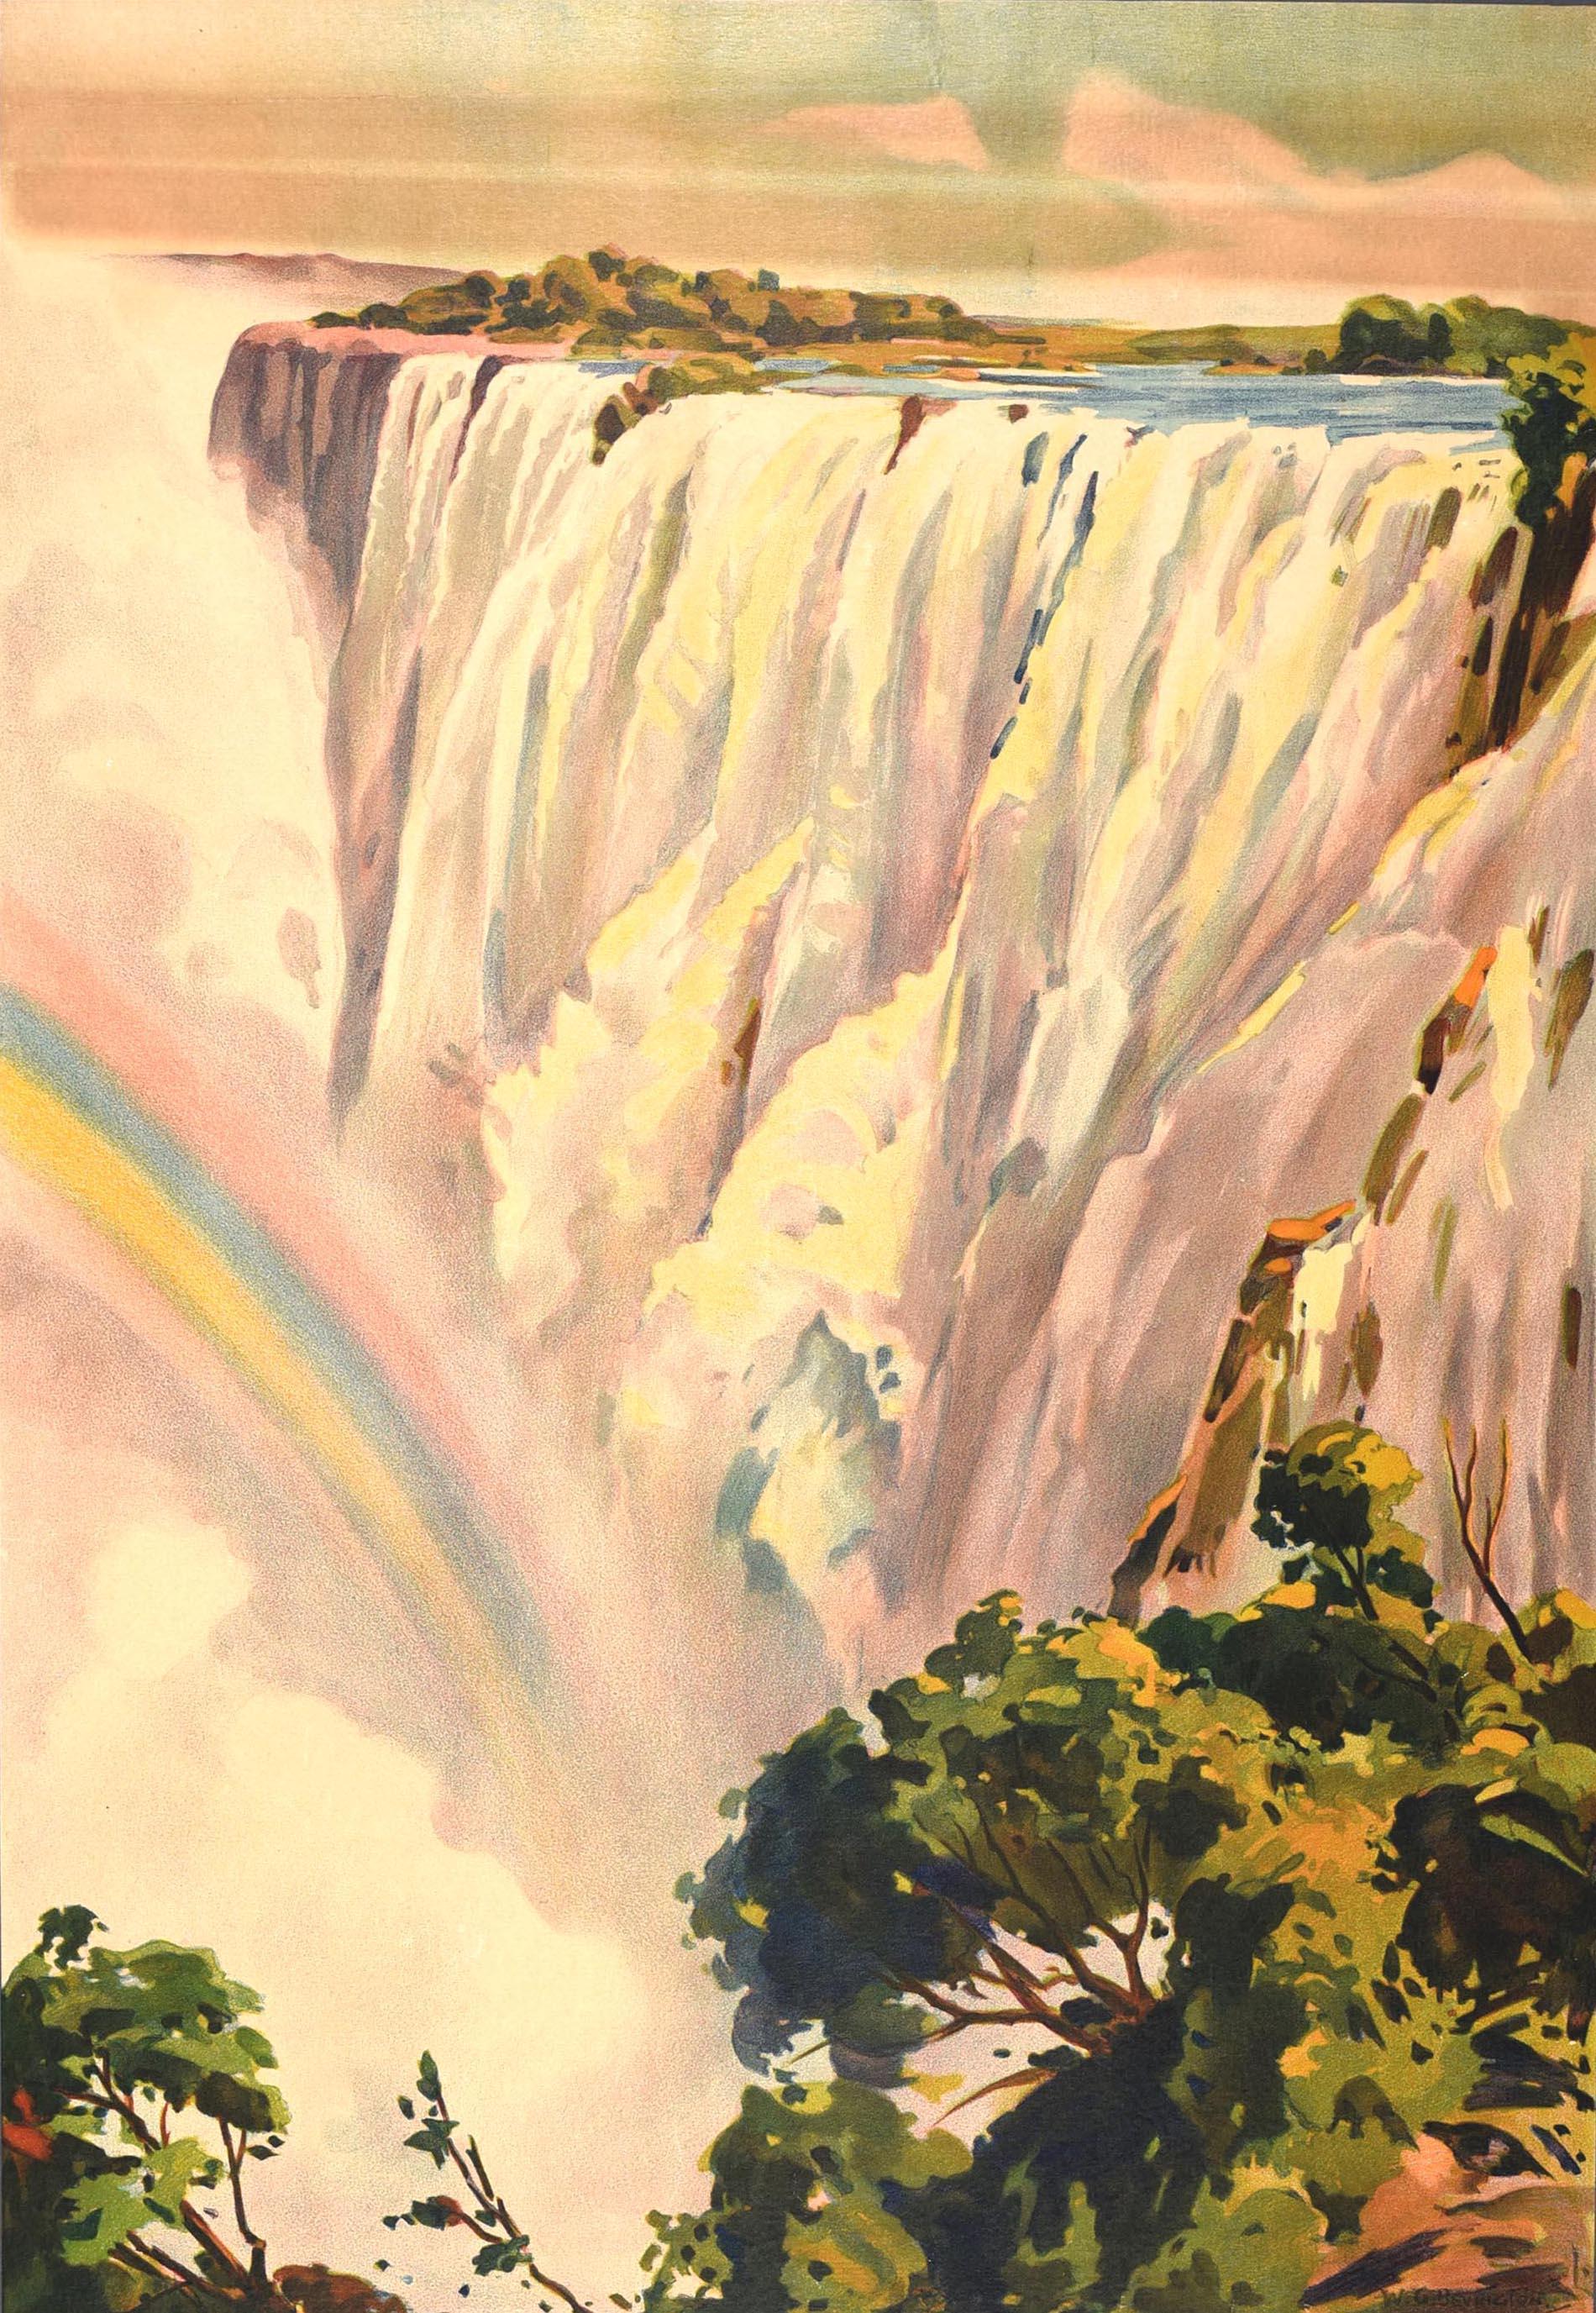 Original vintage travel poster - Victoria Falls more than a mile wide Southern Rhodesia - featuring scenic artwork by William George Bevington (1881-1953) depicting a rainbow emerging from the cascading water at the base of the Victoria Falls